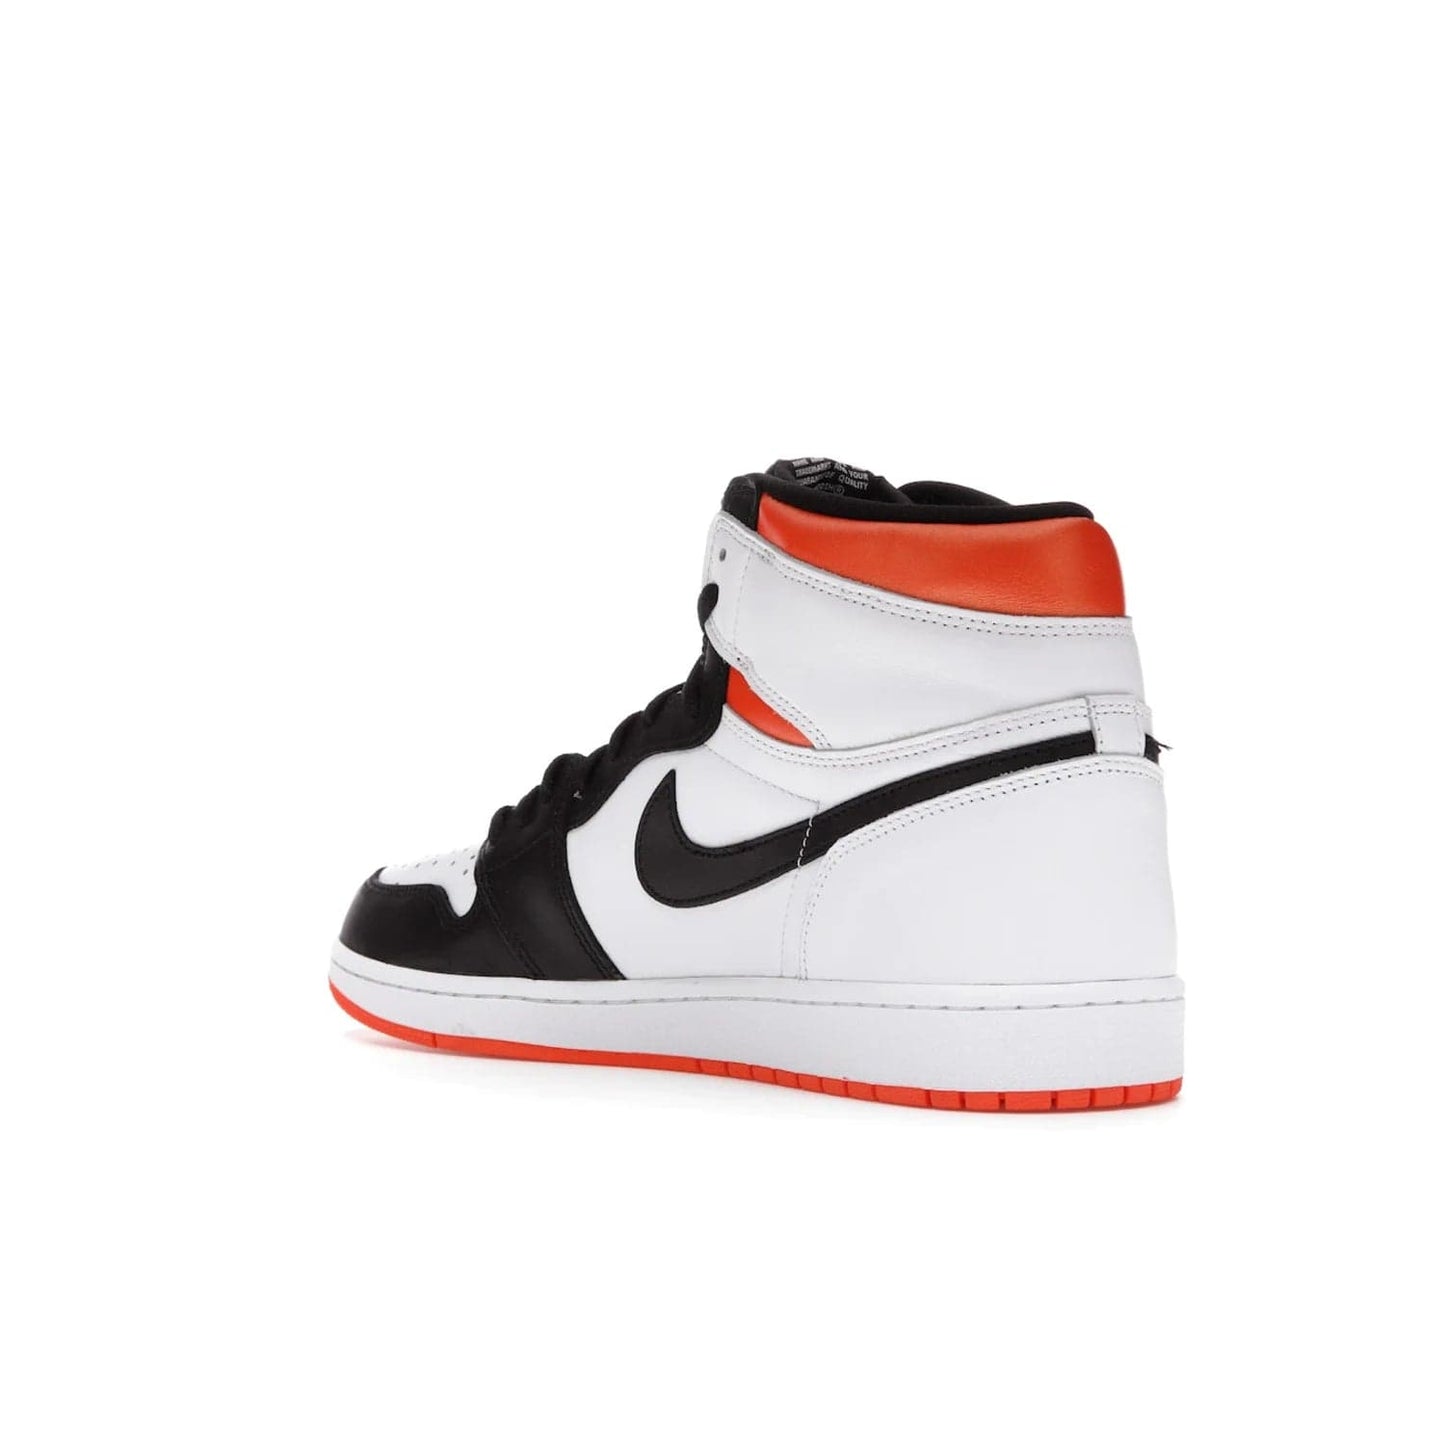 Jordan 1 Retro High Electro Orange - Image 24 - Only at www.BallersClubKickz.com - This Air Jordan 1 Retro High Electro Orange features a white leather upper with black overlays and vibrant Hyper Orange ankle wrap. Turn heads with this iconic design of woven tongue label and sole. Get yours today and add some serious style to your rotation.